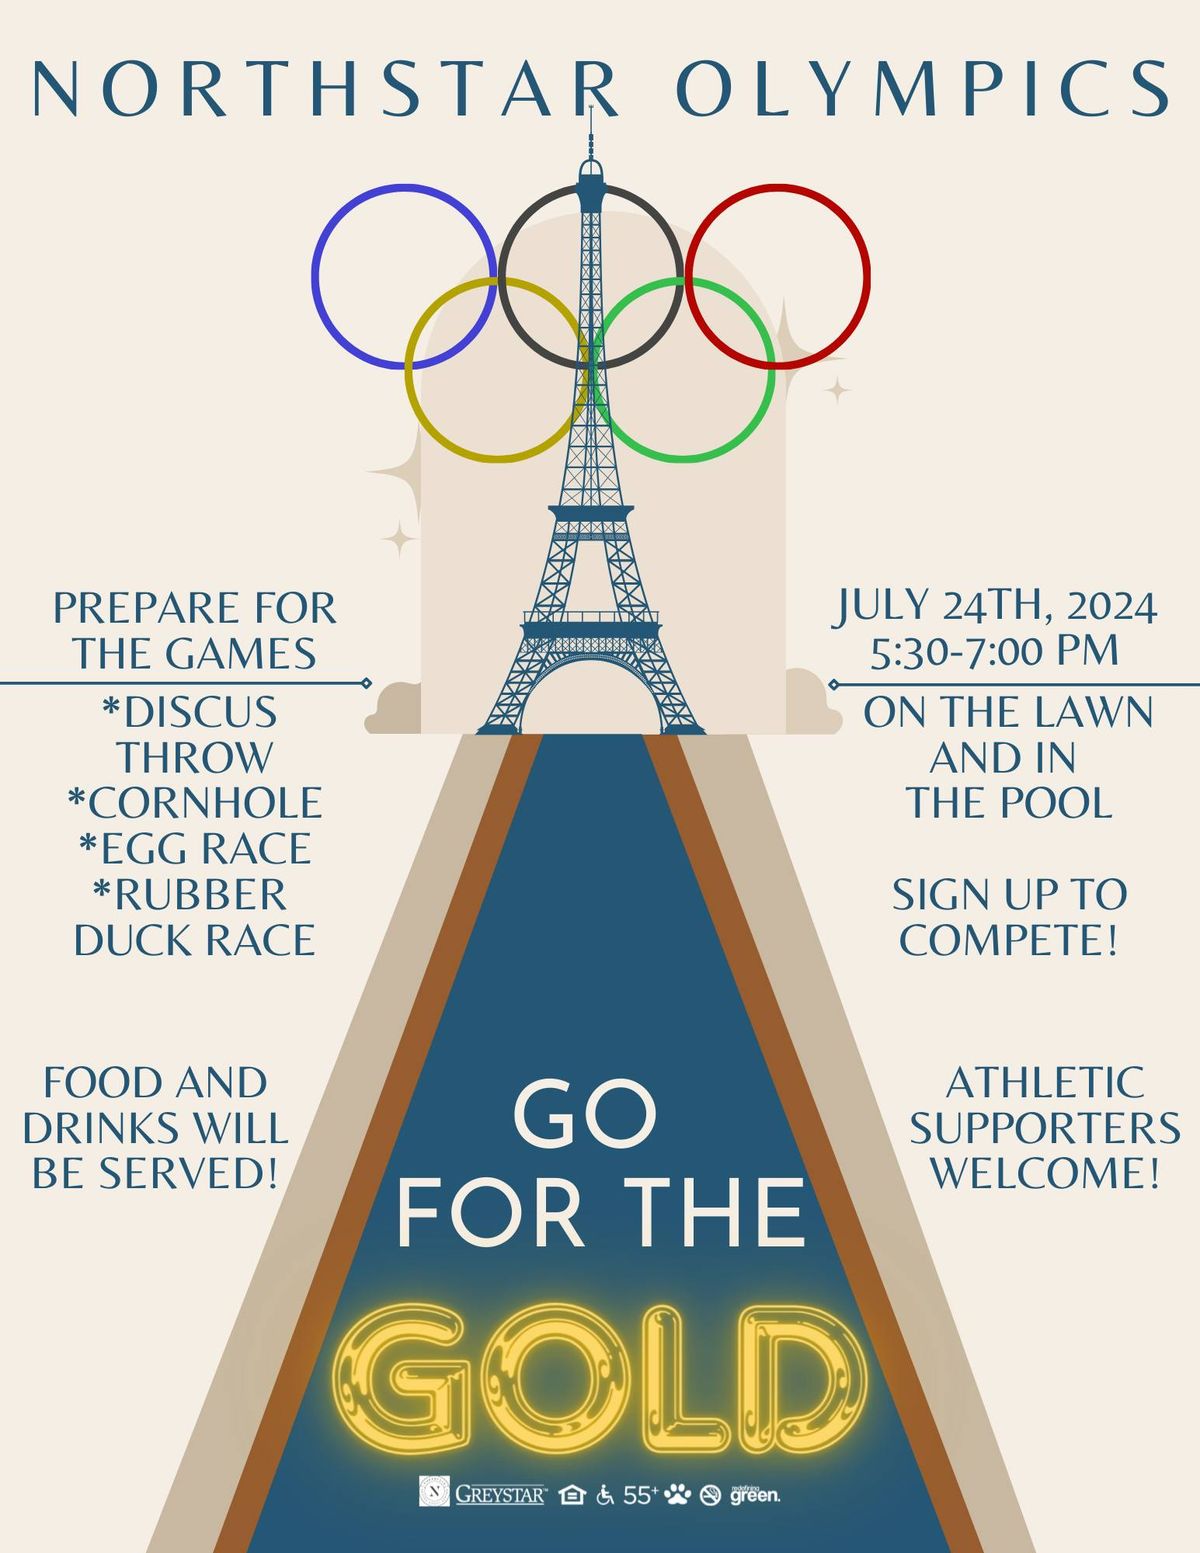 Go For The Gold!